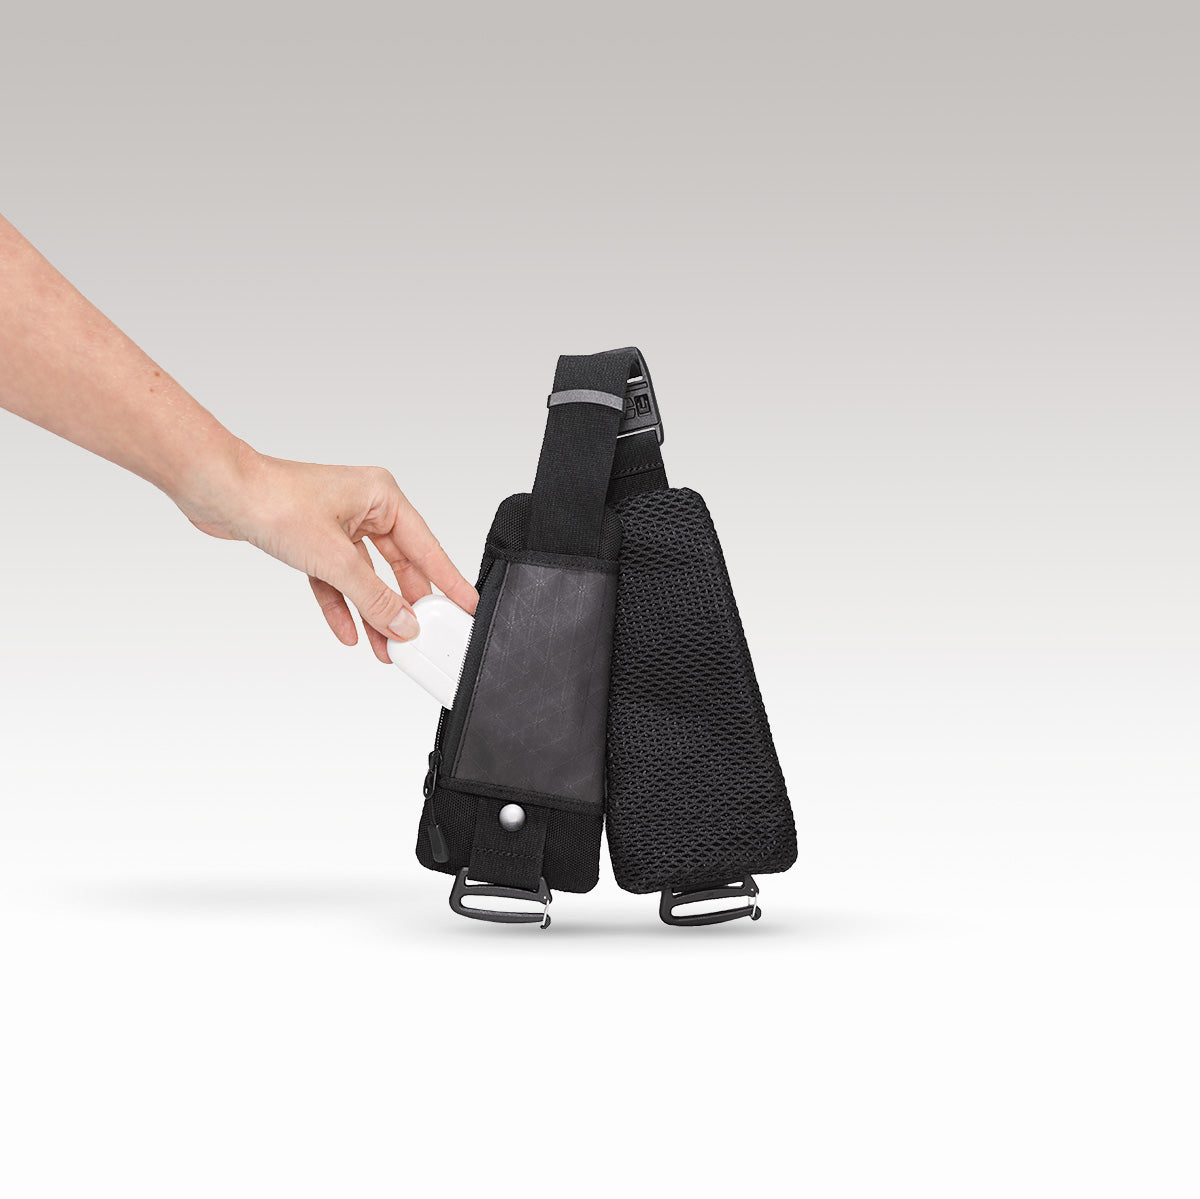 Detachable Waist Belt | RIKR - to be used with 24L, 23L and 20L Backpacks